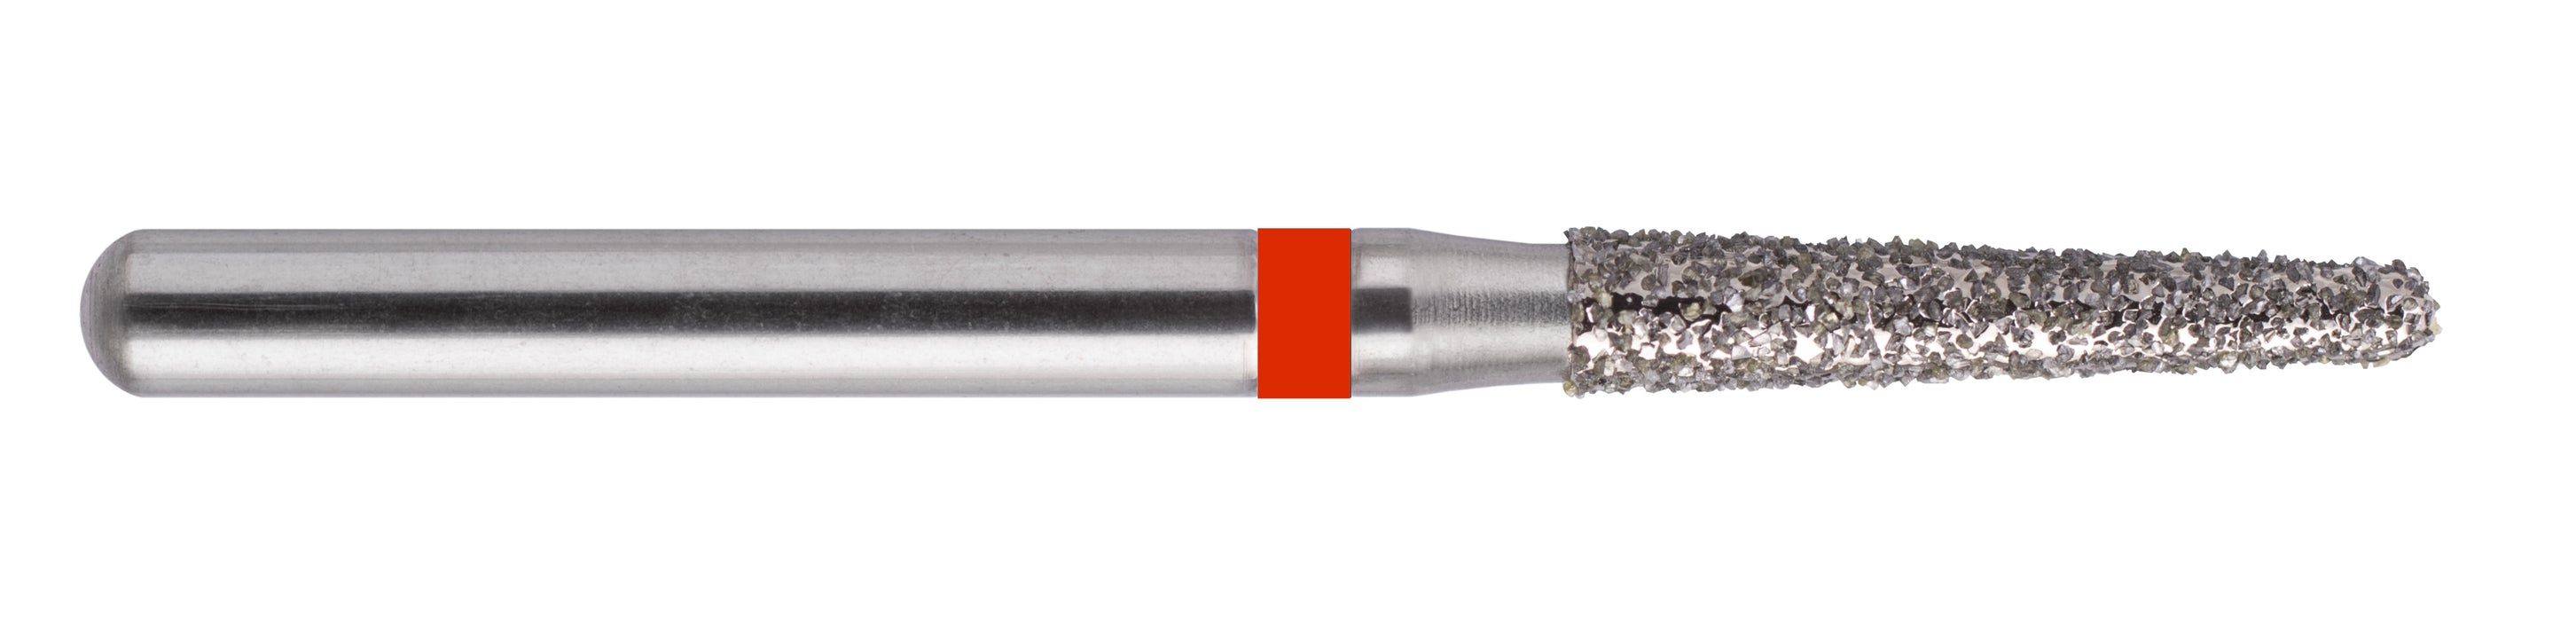 856 - Cone with rounded end